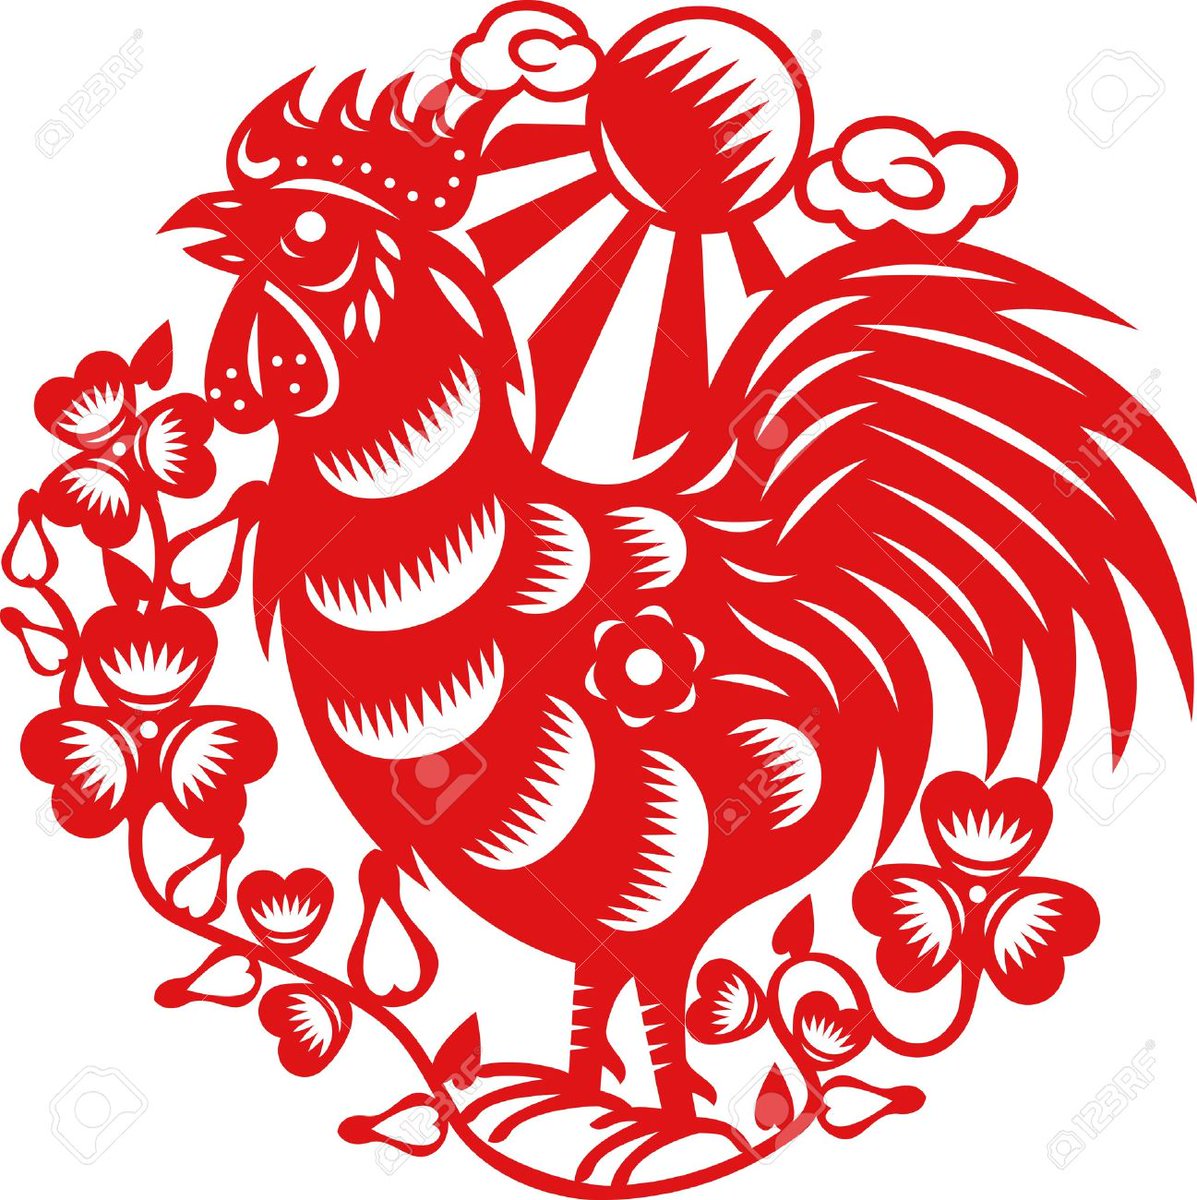 How old are you if you were born in 1969 Chccs On Twitter Happy Chinese New Year It S The Year Of The Rooster Is This Your Sign It Is If You Were Born In 2017 2005 1993 1981 Or 1969 Https T Co B9drtxx1hx